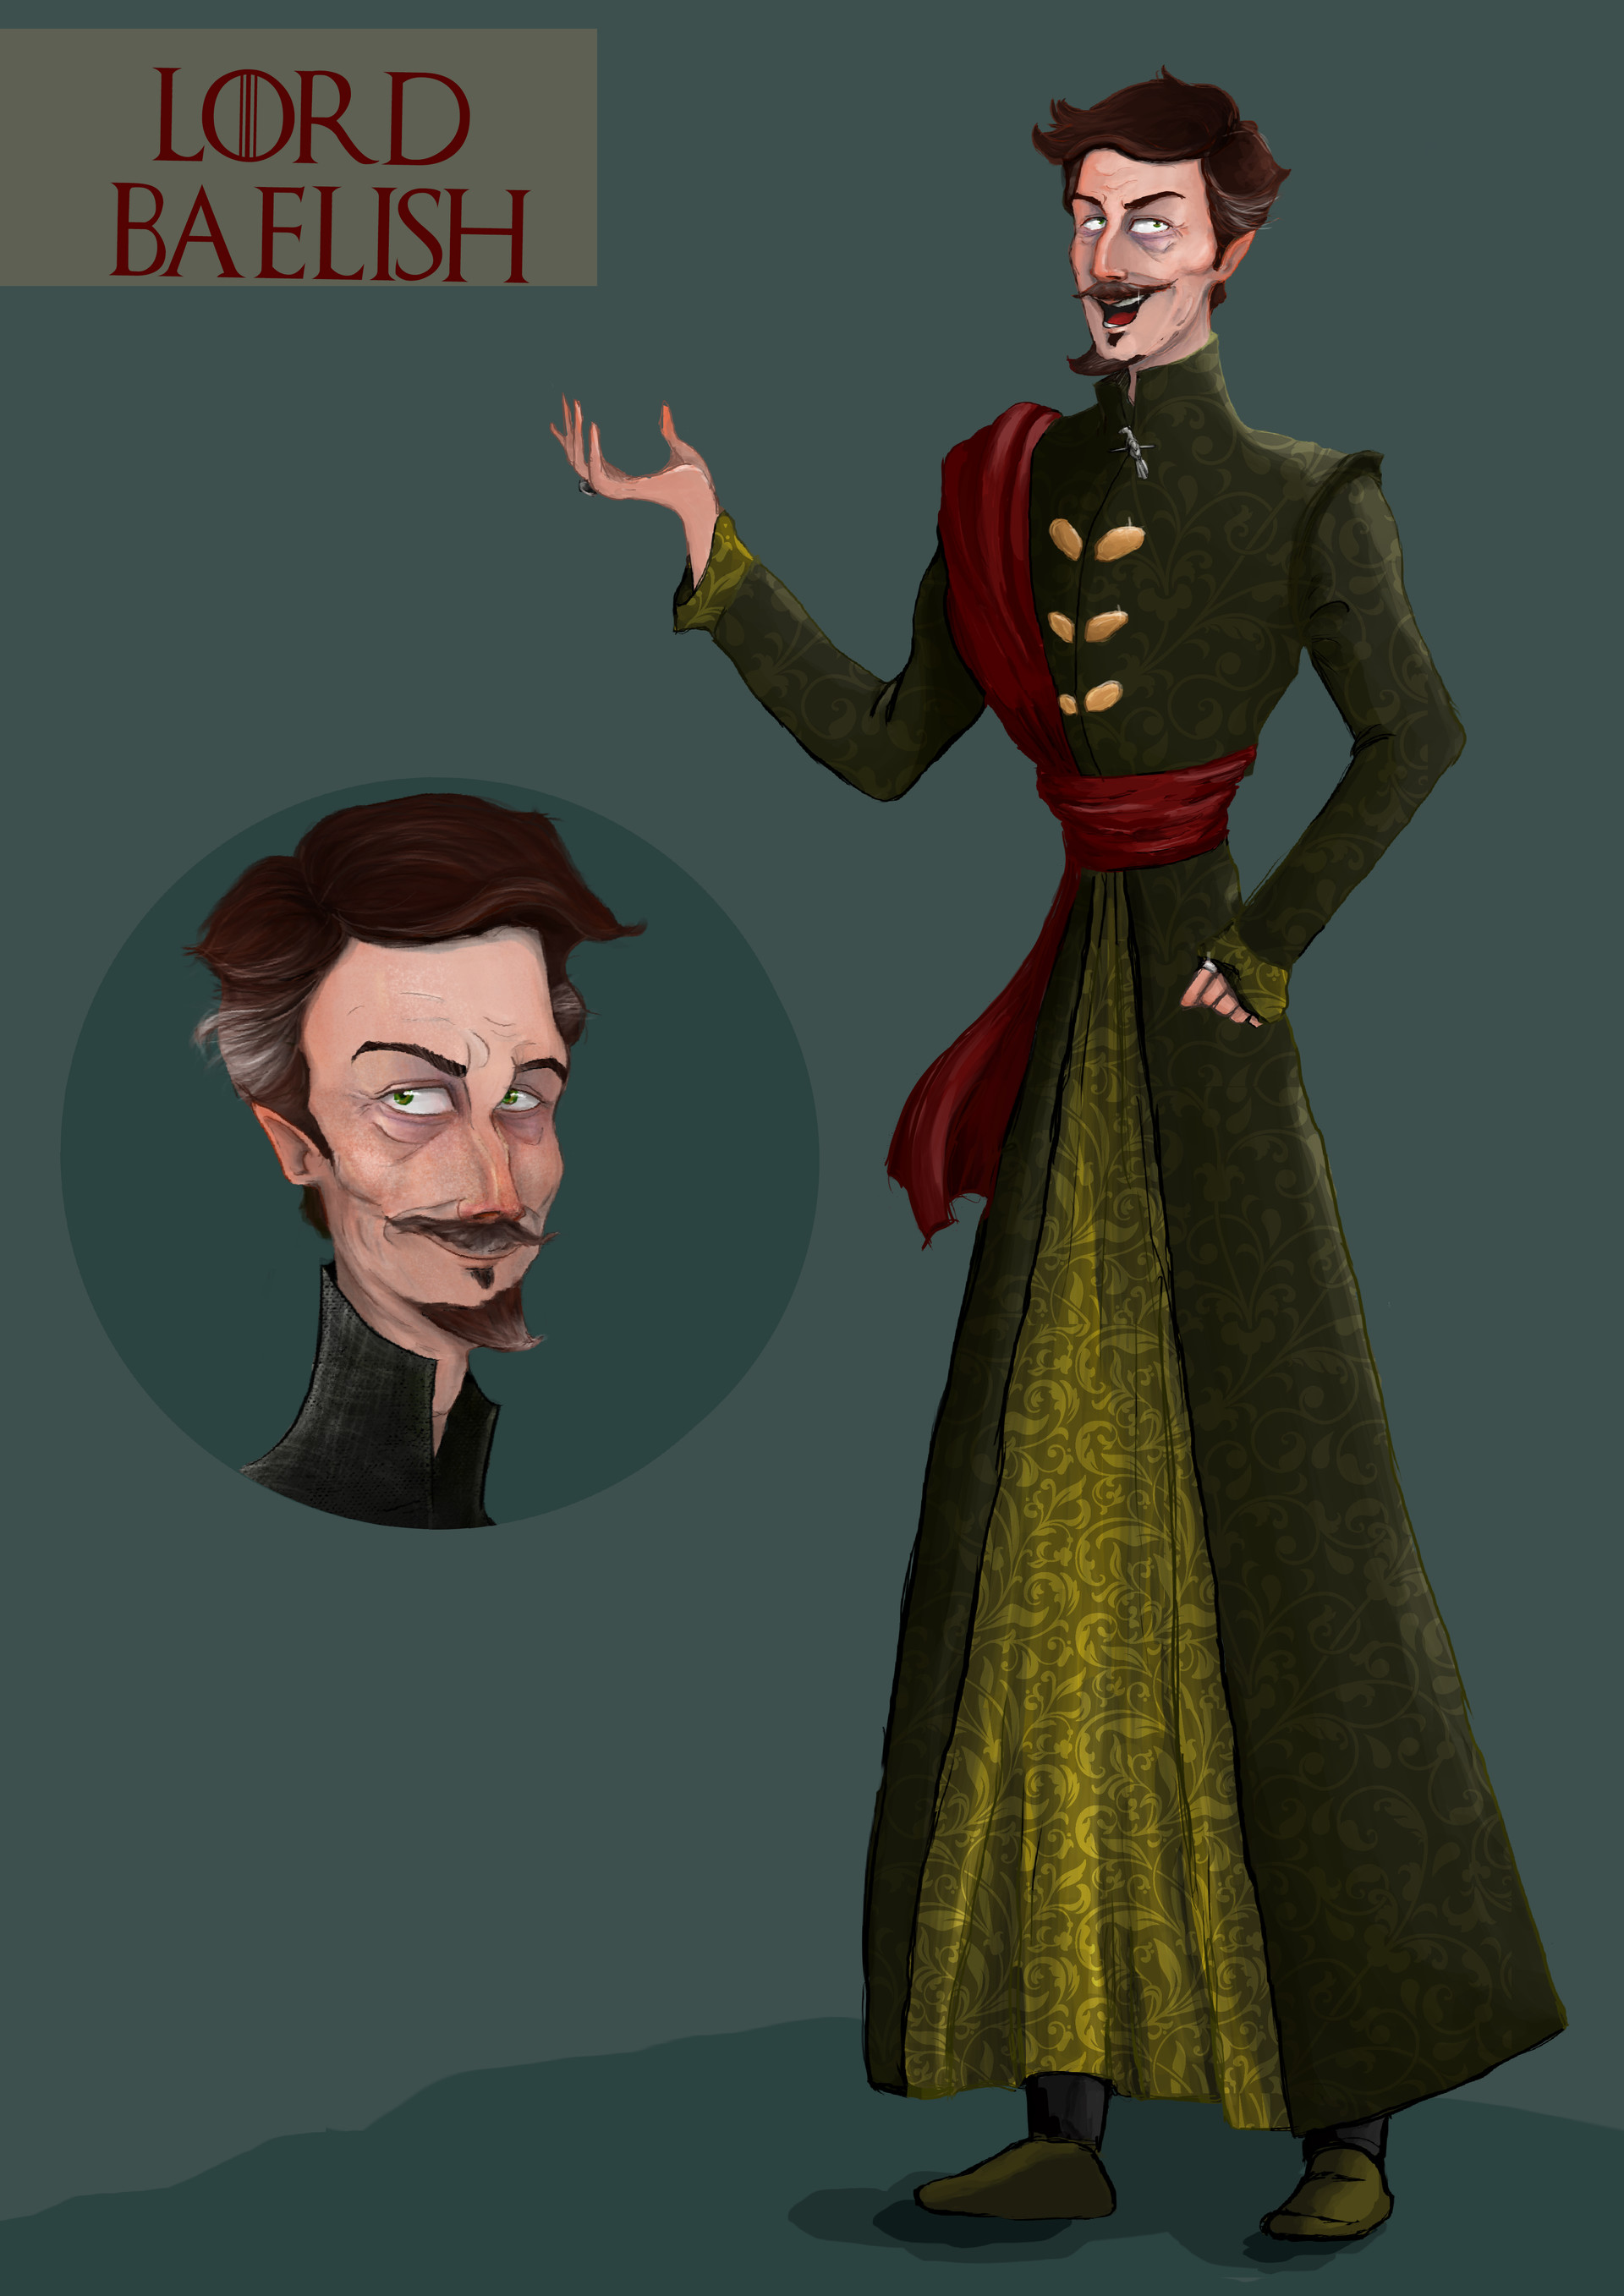 Game of Thrones TV Show Fan Art - House Baelish - Large Art Prints by Joel  Jerry | Buy Posters, Frames, Canvas & Digital Art Prints | Small, Compact,  Medium and Large Variants